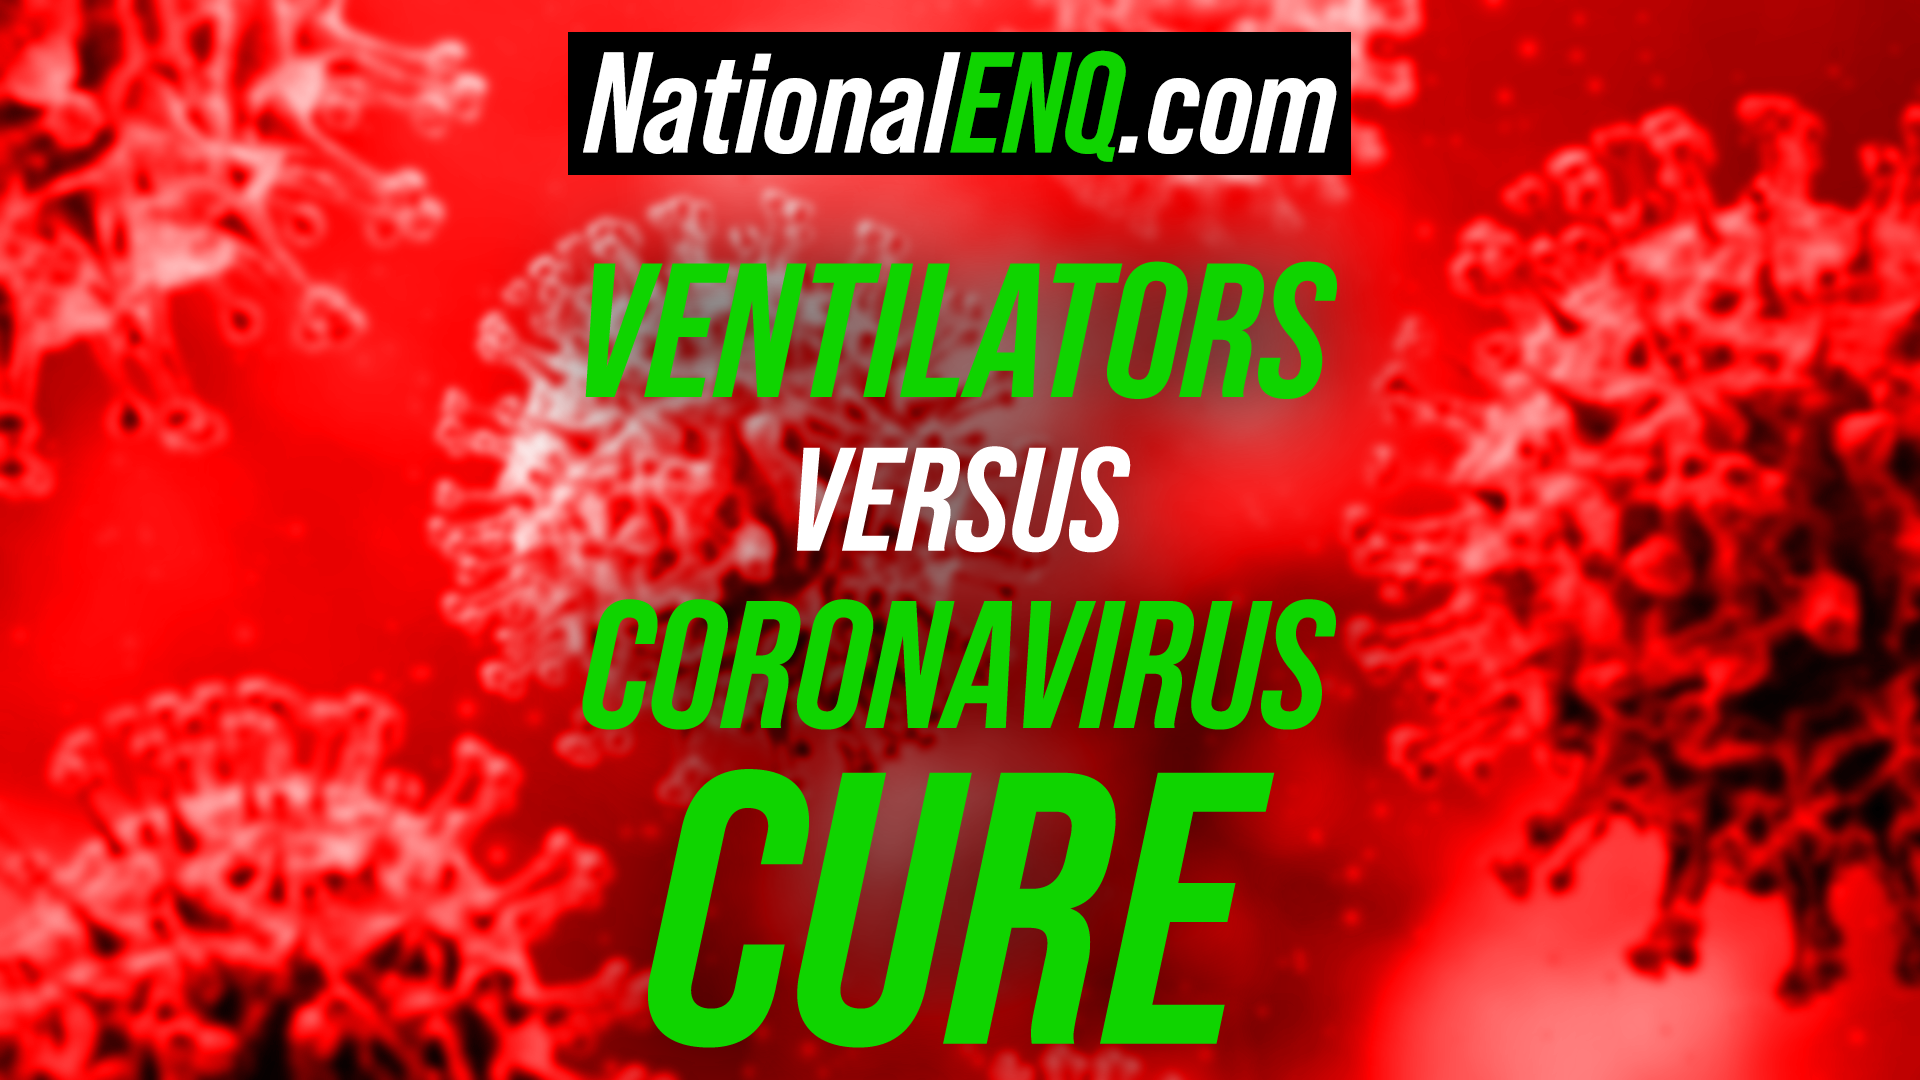 National ENQ COVID-19 Health Investigation: Are a Large Number of Ventilators Required to Fight Coronavirus?